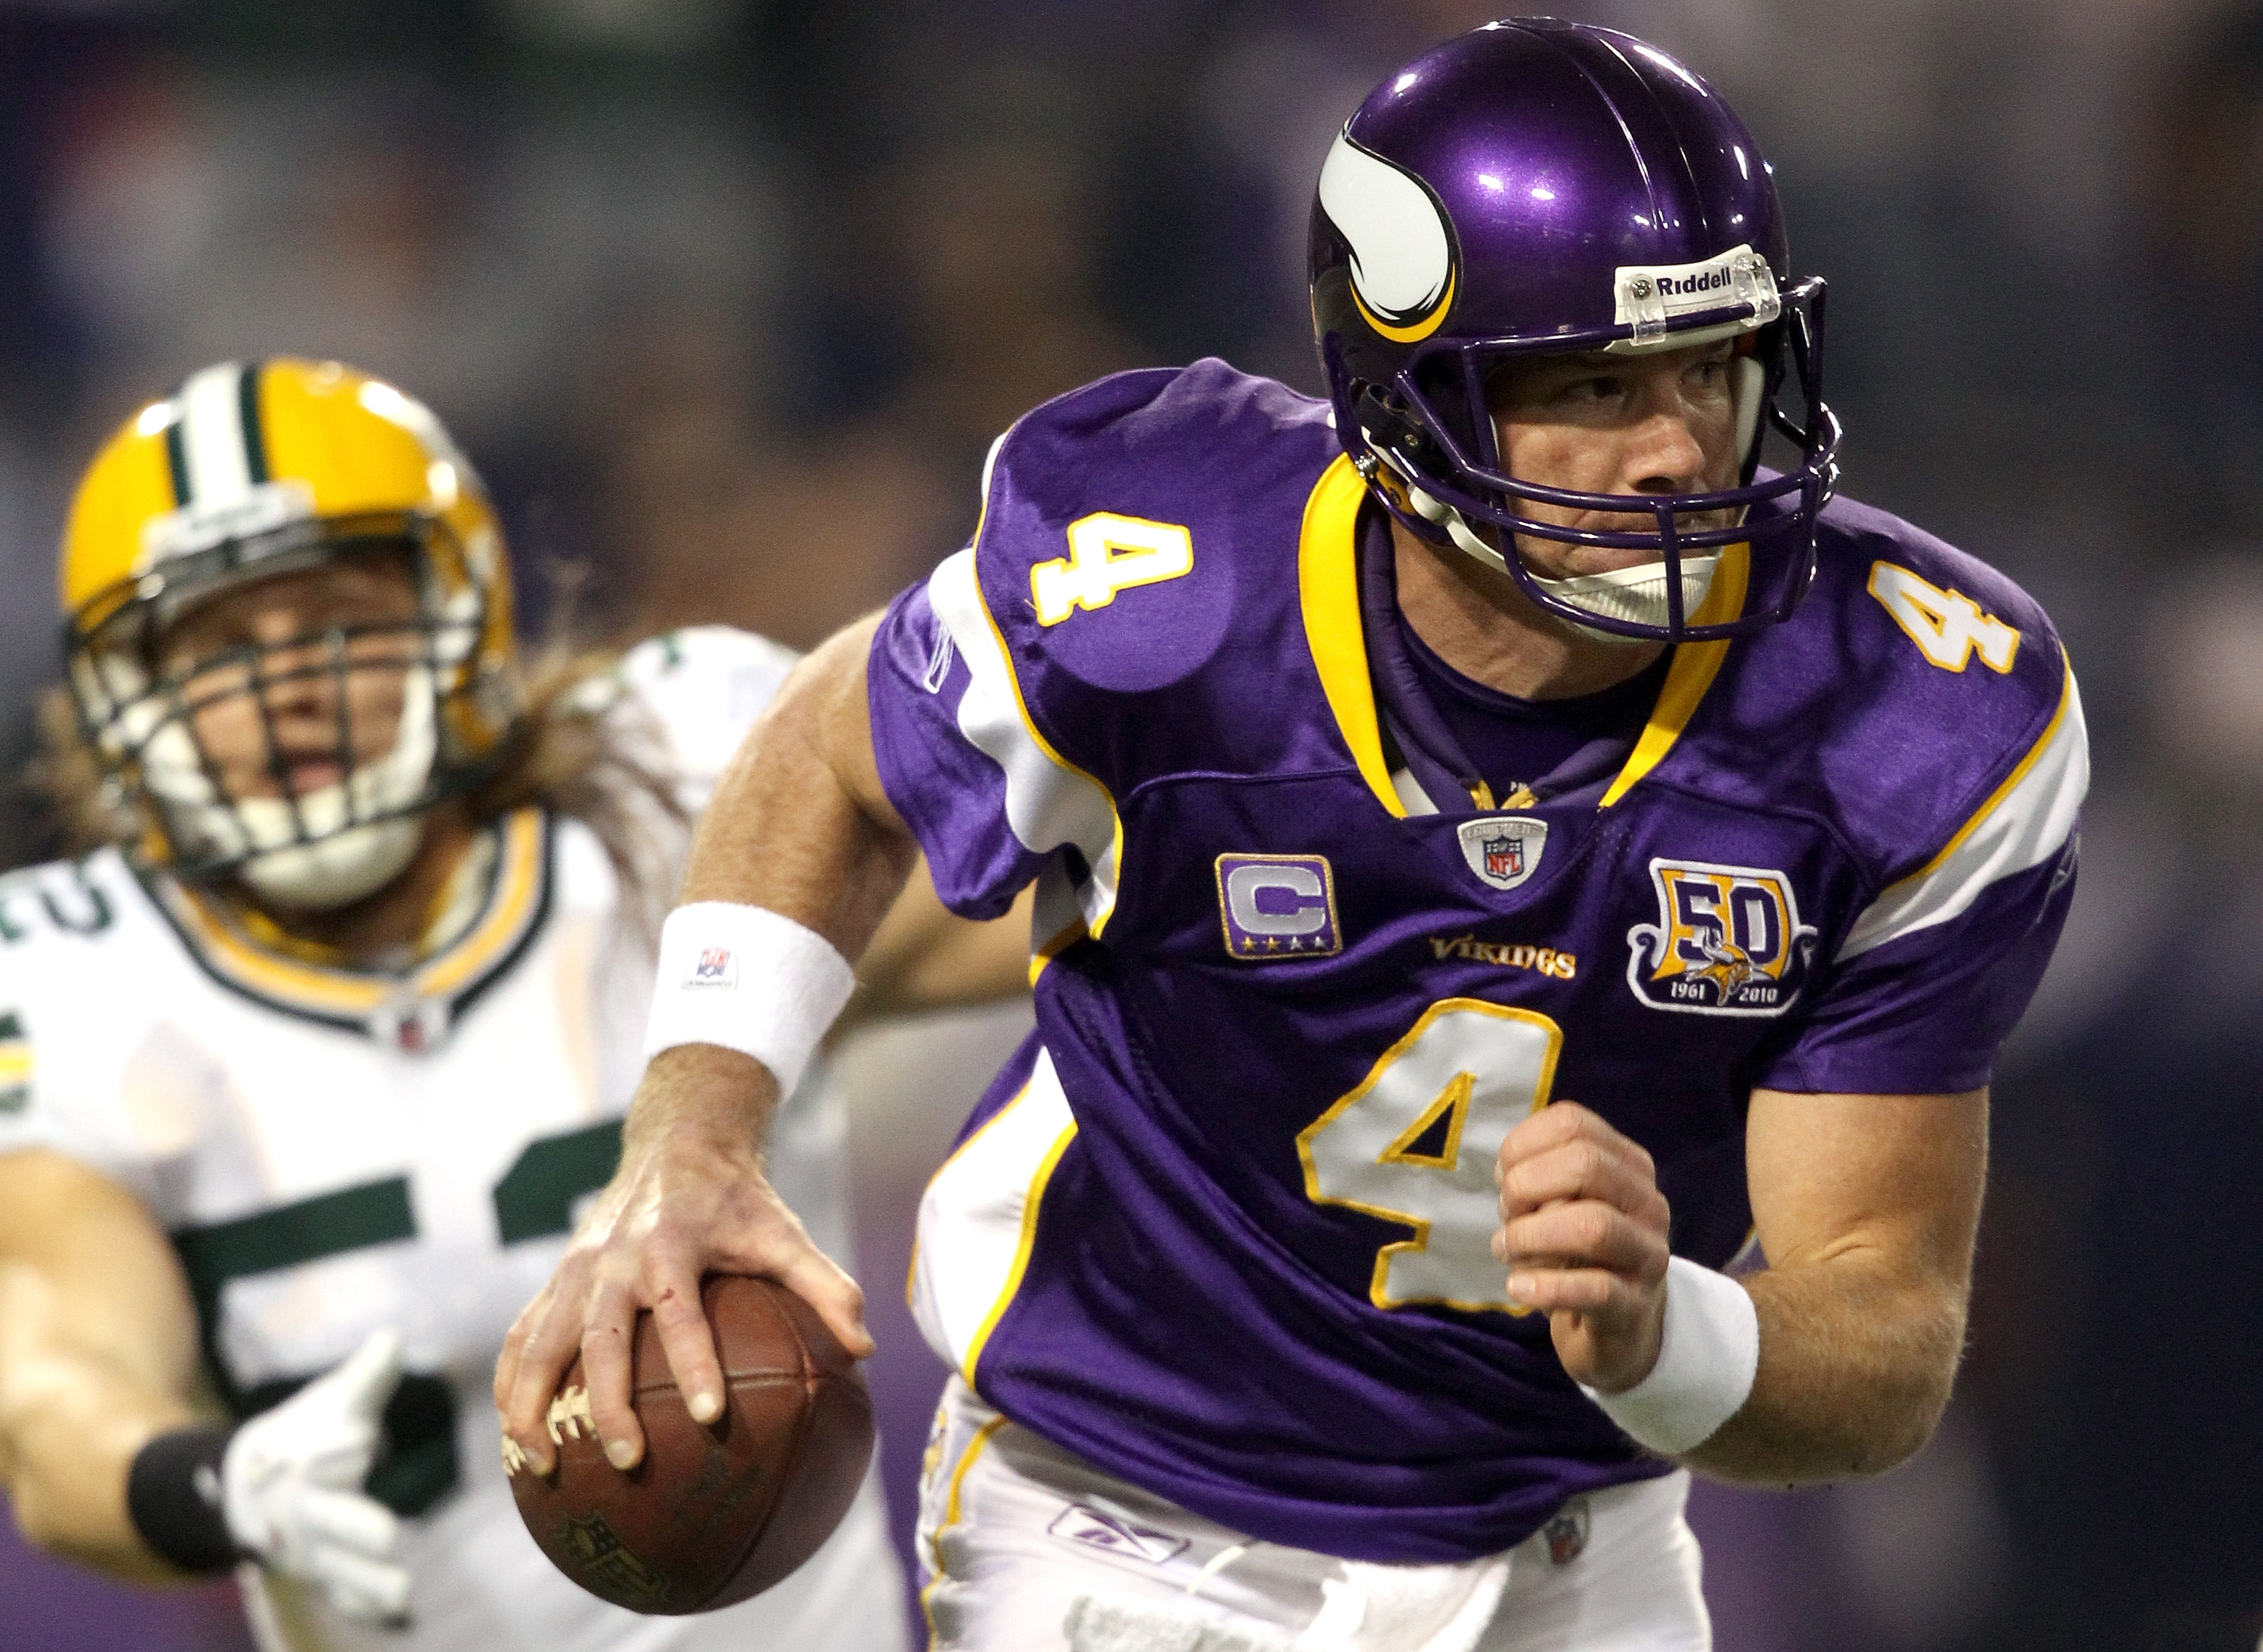 MINNEAPOLIS - NOVEMBER 21:  Quarterback Brett Favre #4 of the Minnesota Vikings looks for an open receiver while playing the Green Bay Packers at the Hubert H. Humphrey Metrodome on November 21, 2010 in Minneapolis, Minnesota.  (Photo by Matthew Stockman/